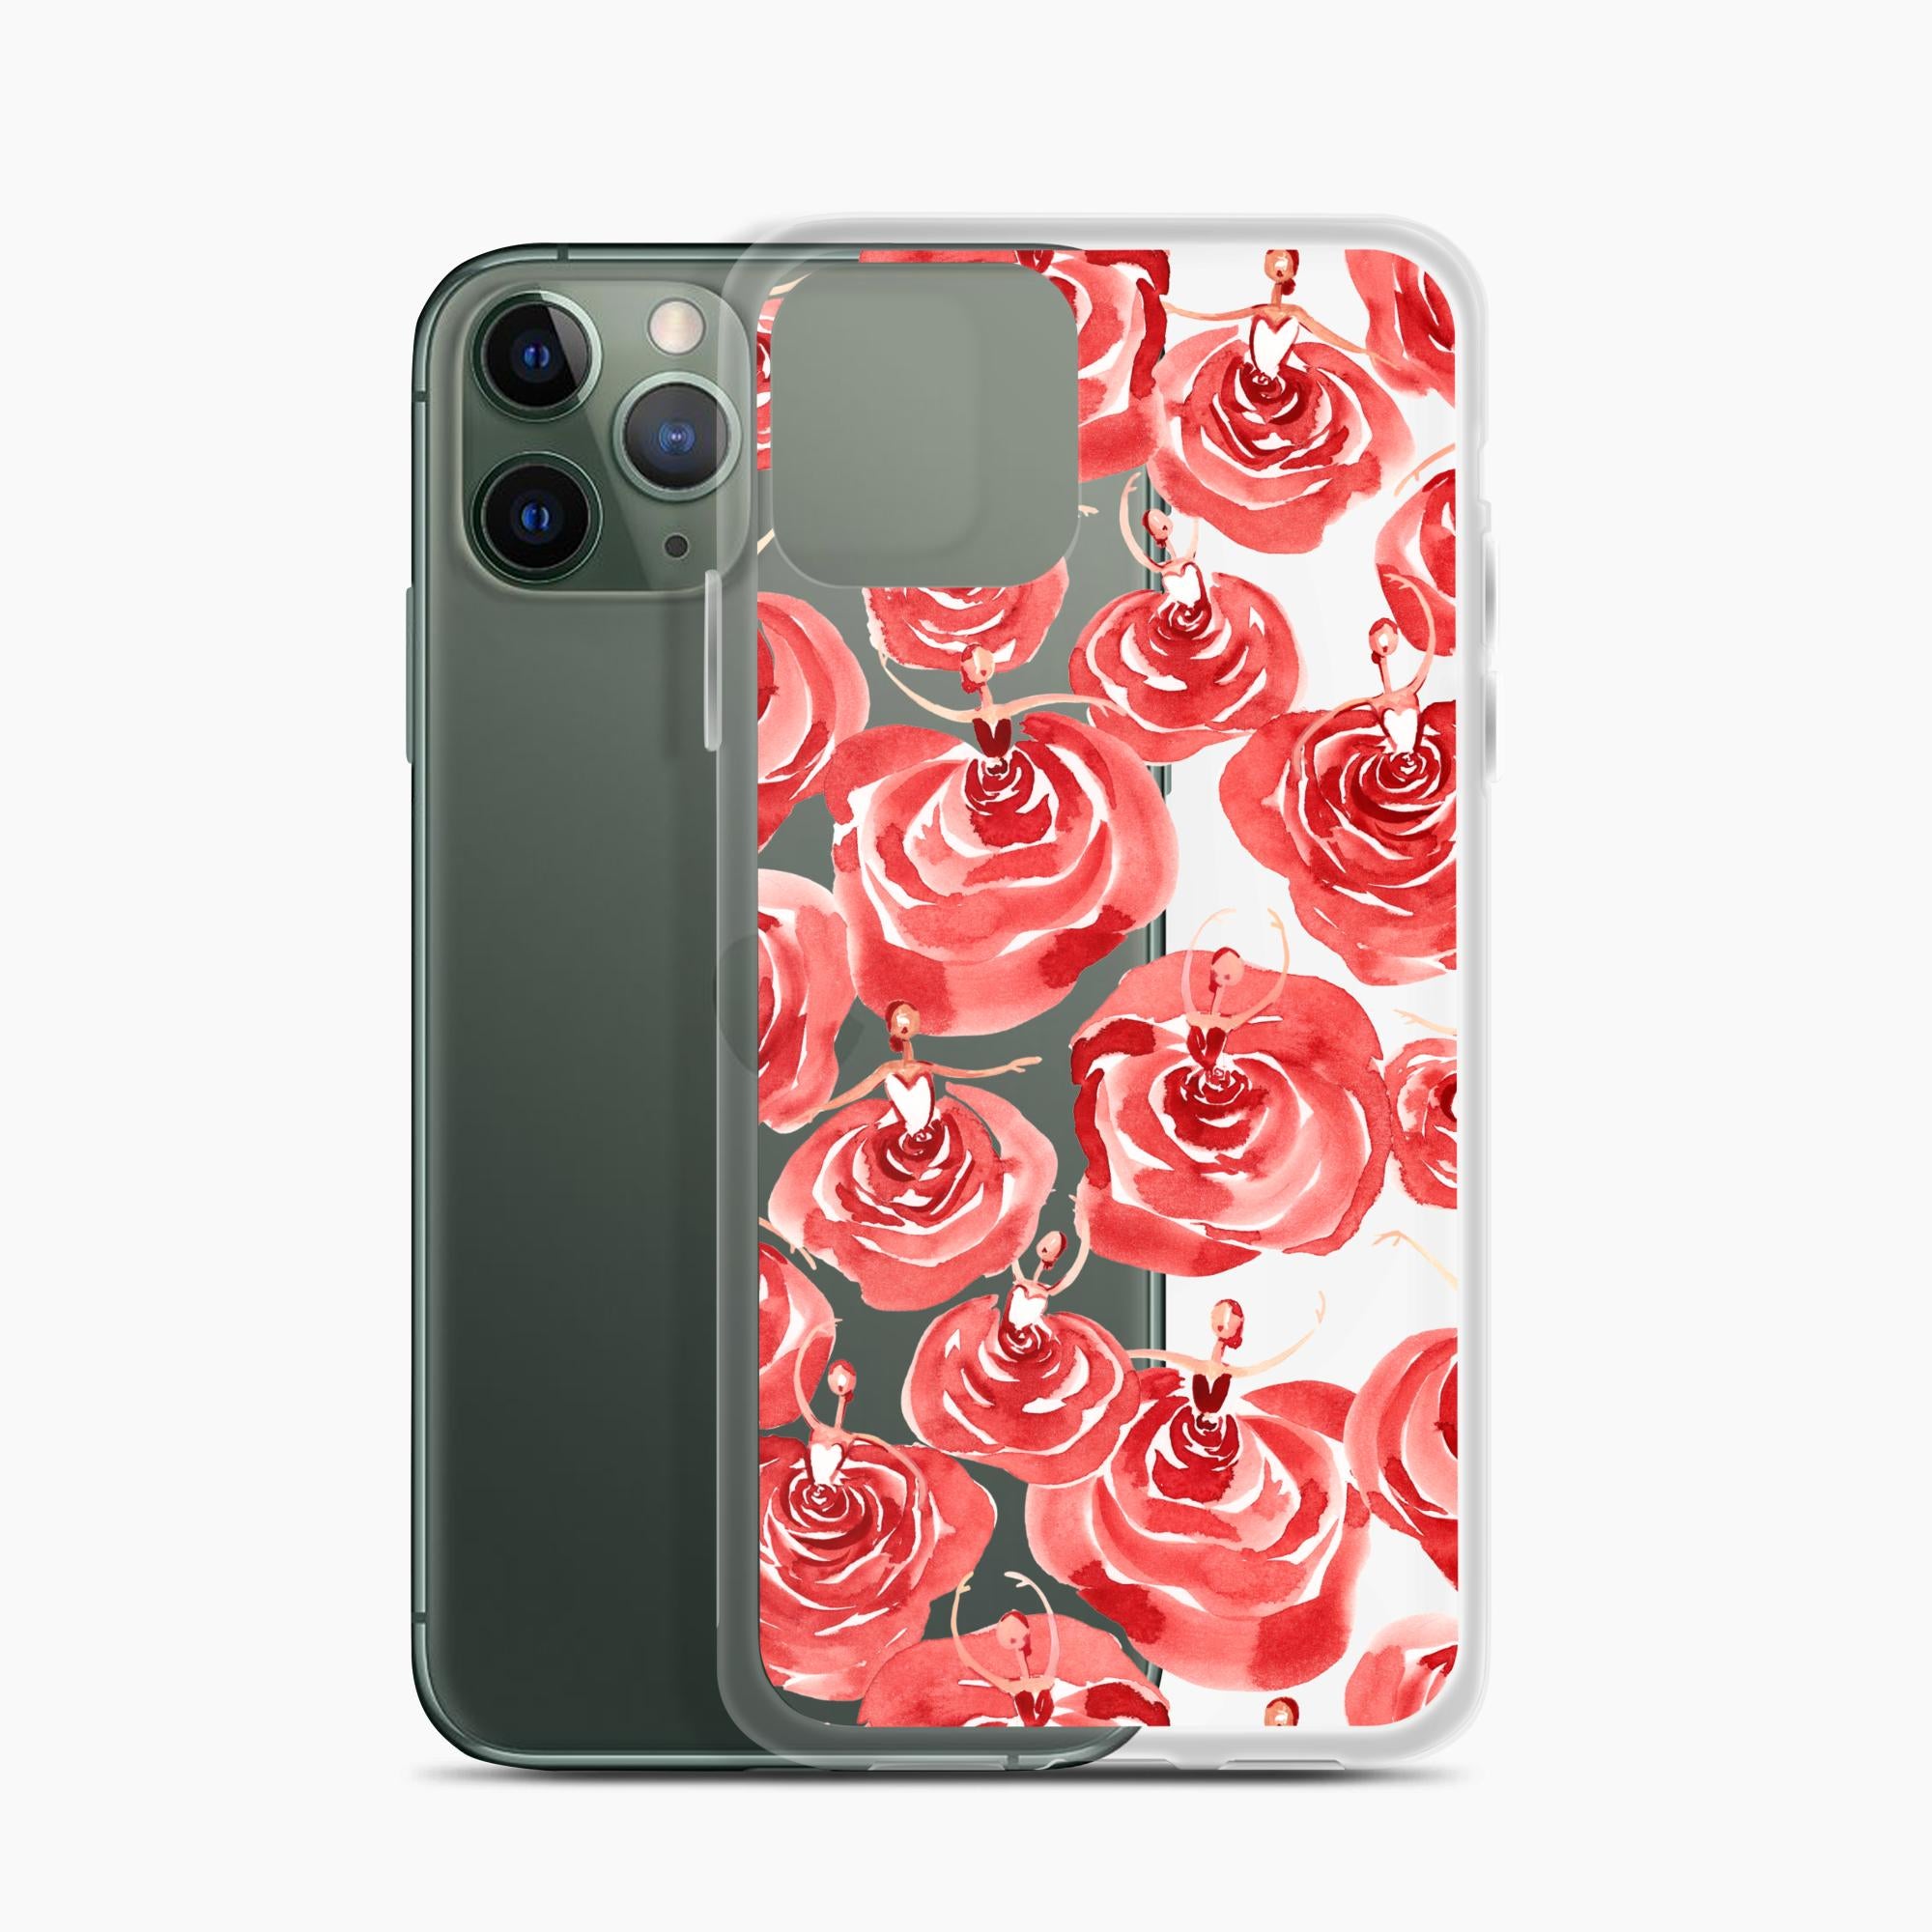 Waltz of the Roses iPhone Case